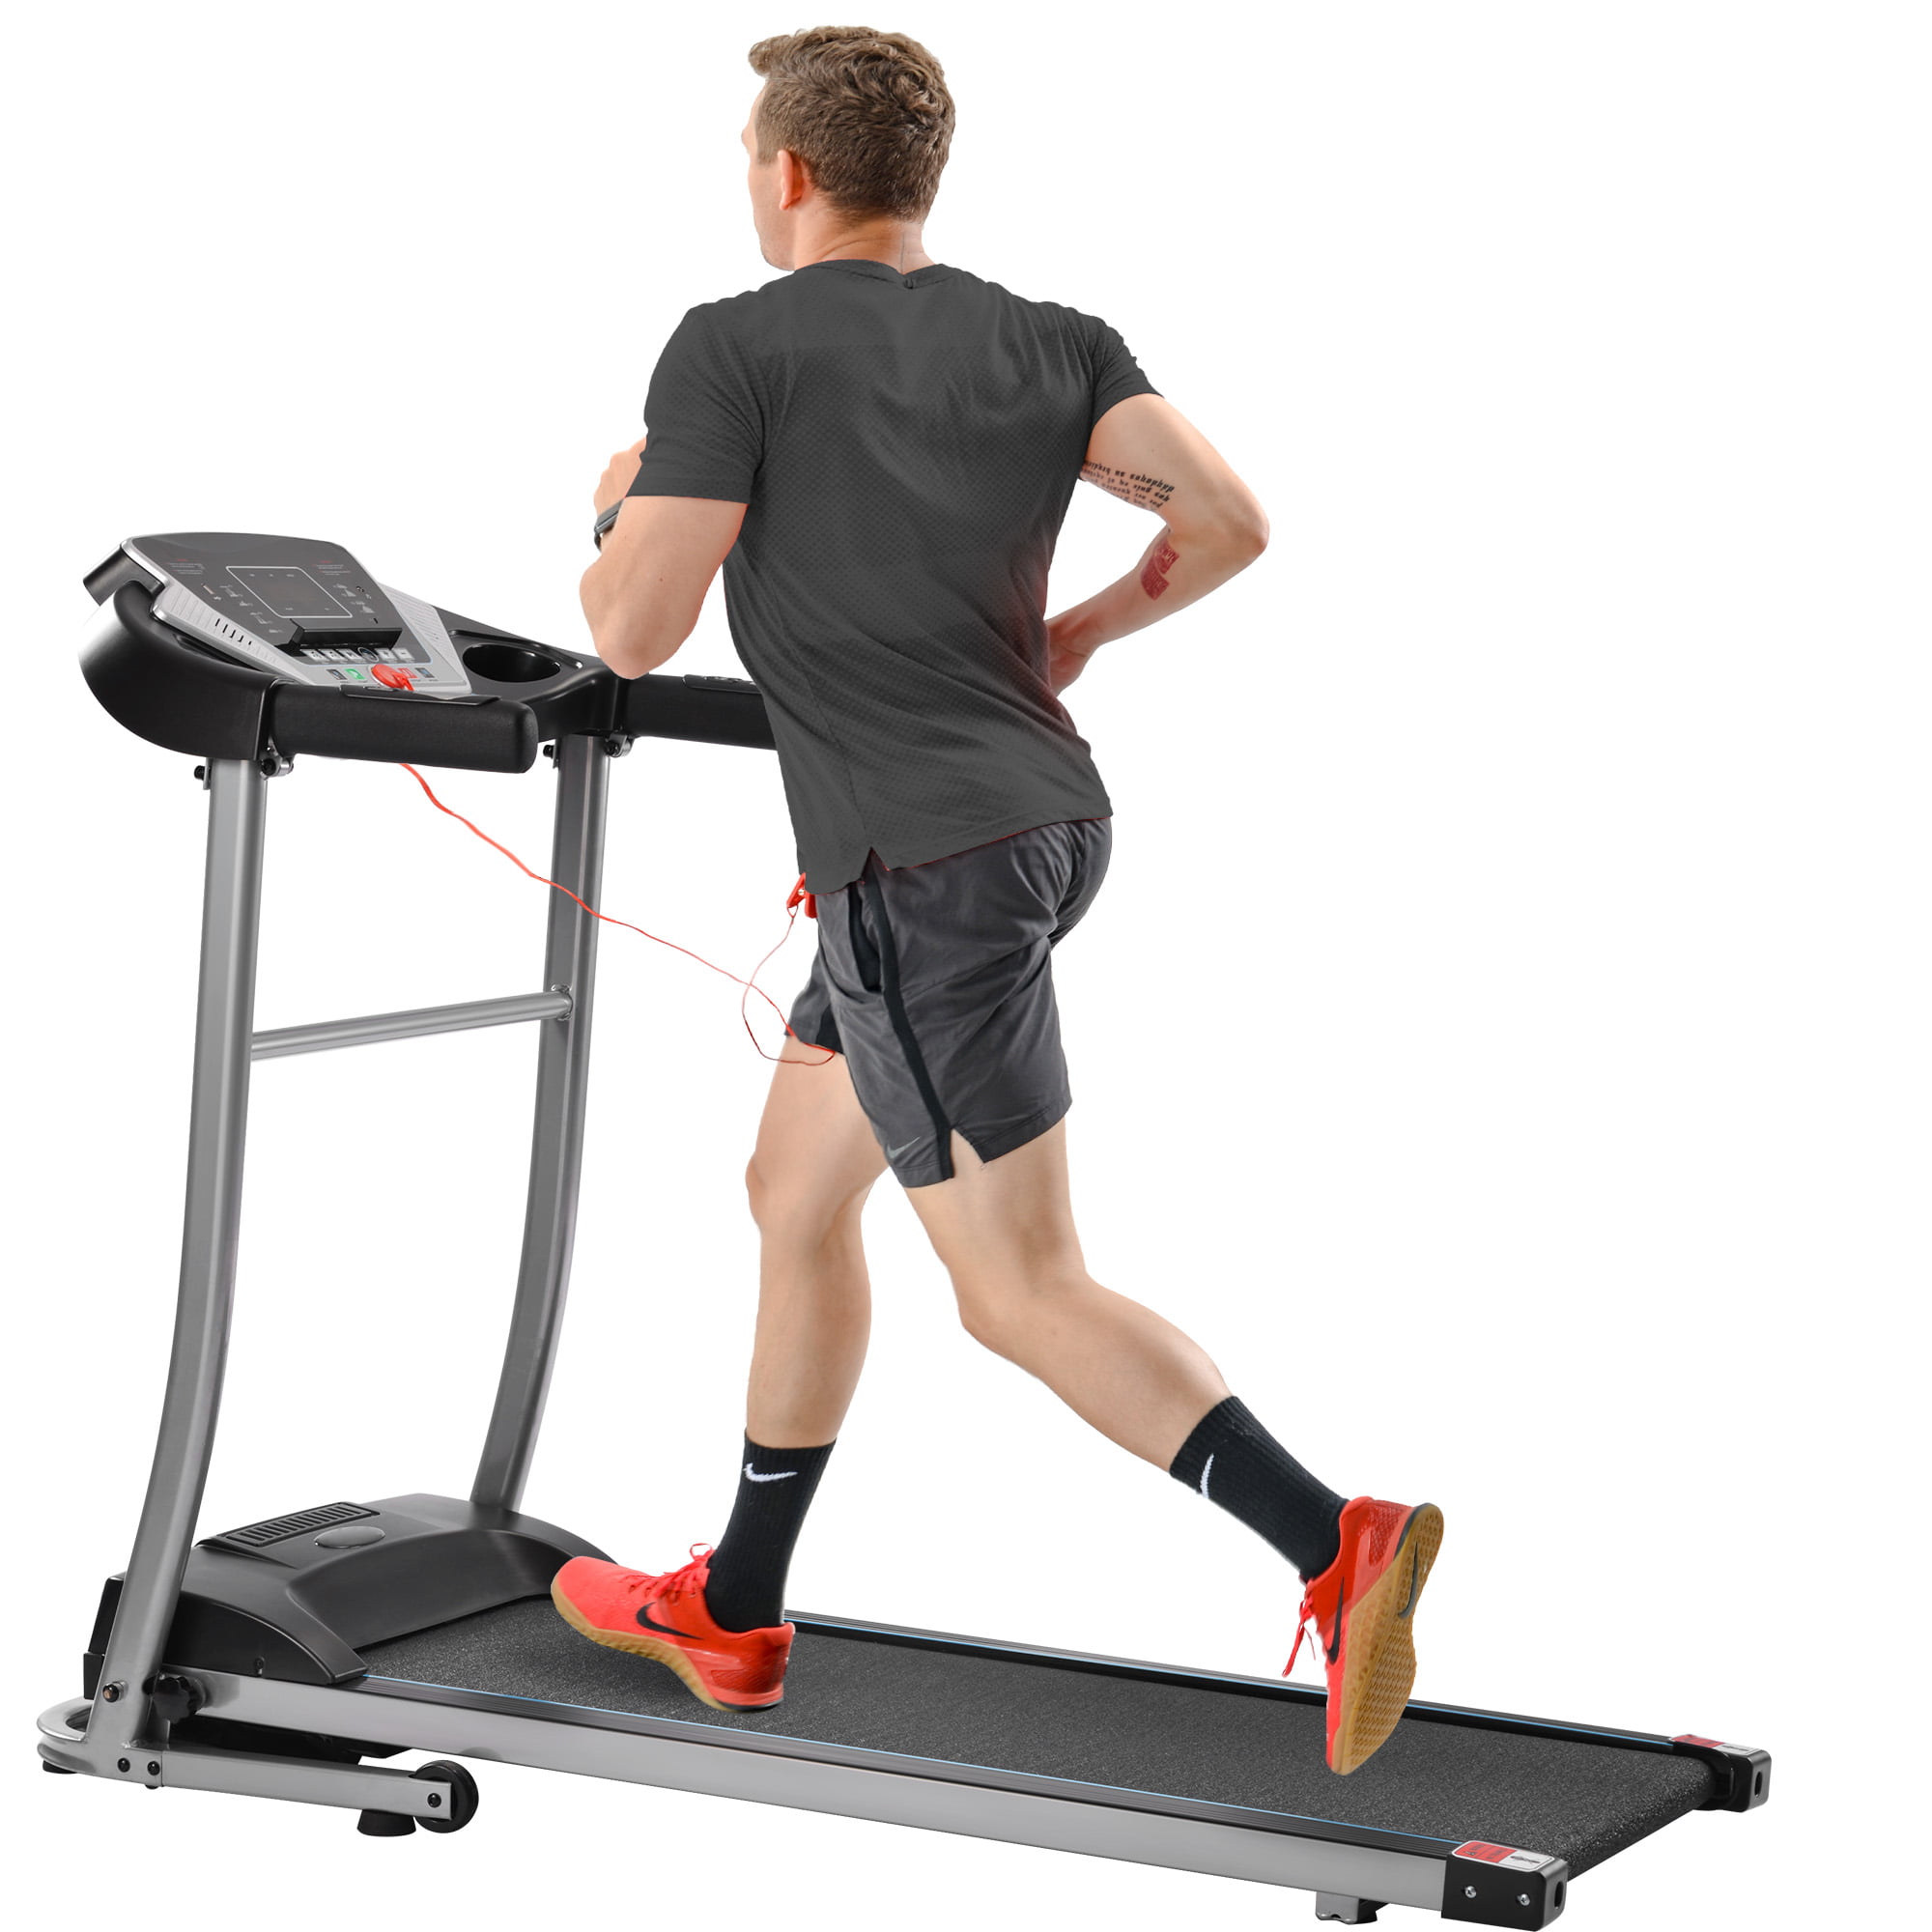 Details about   Folding Treadmill Electric Motorized Power Running Jogging Fitness Machine Black 